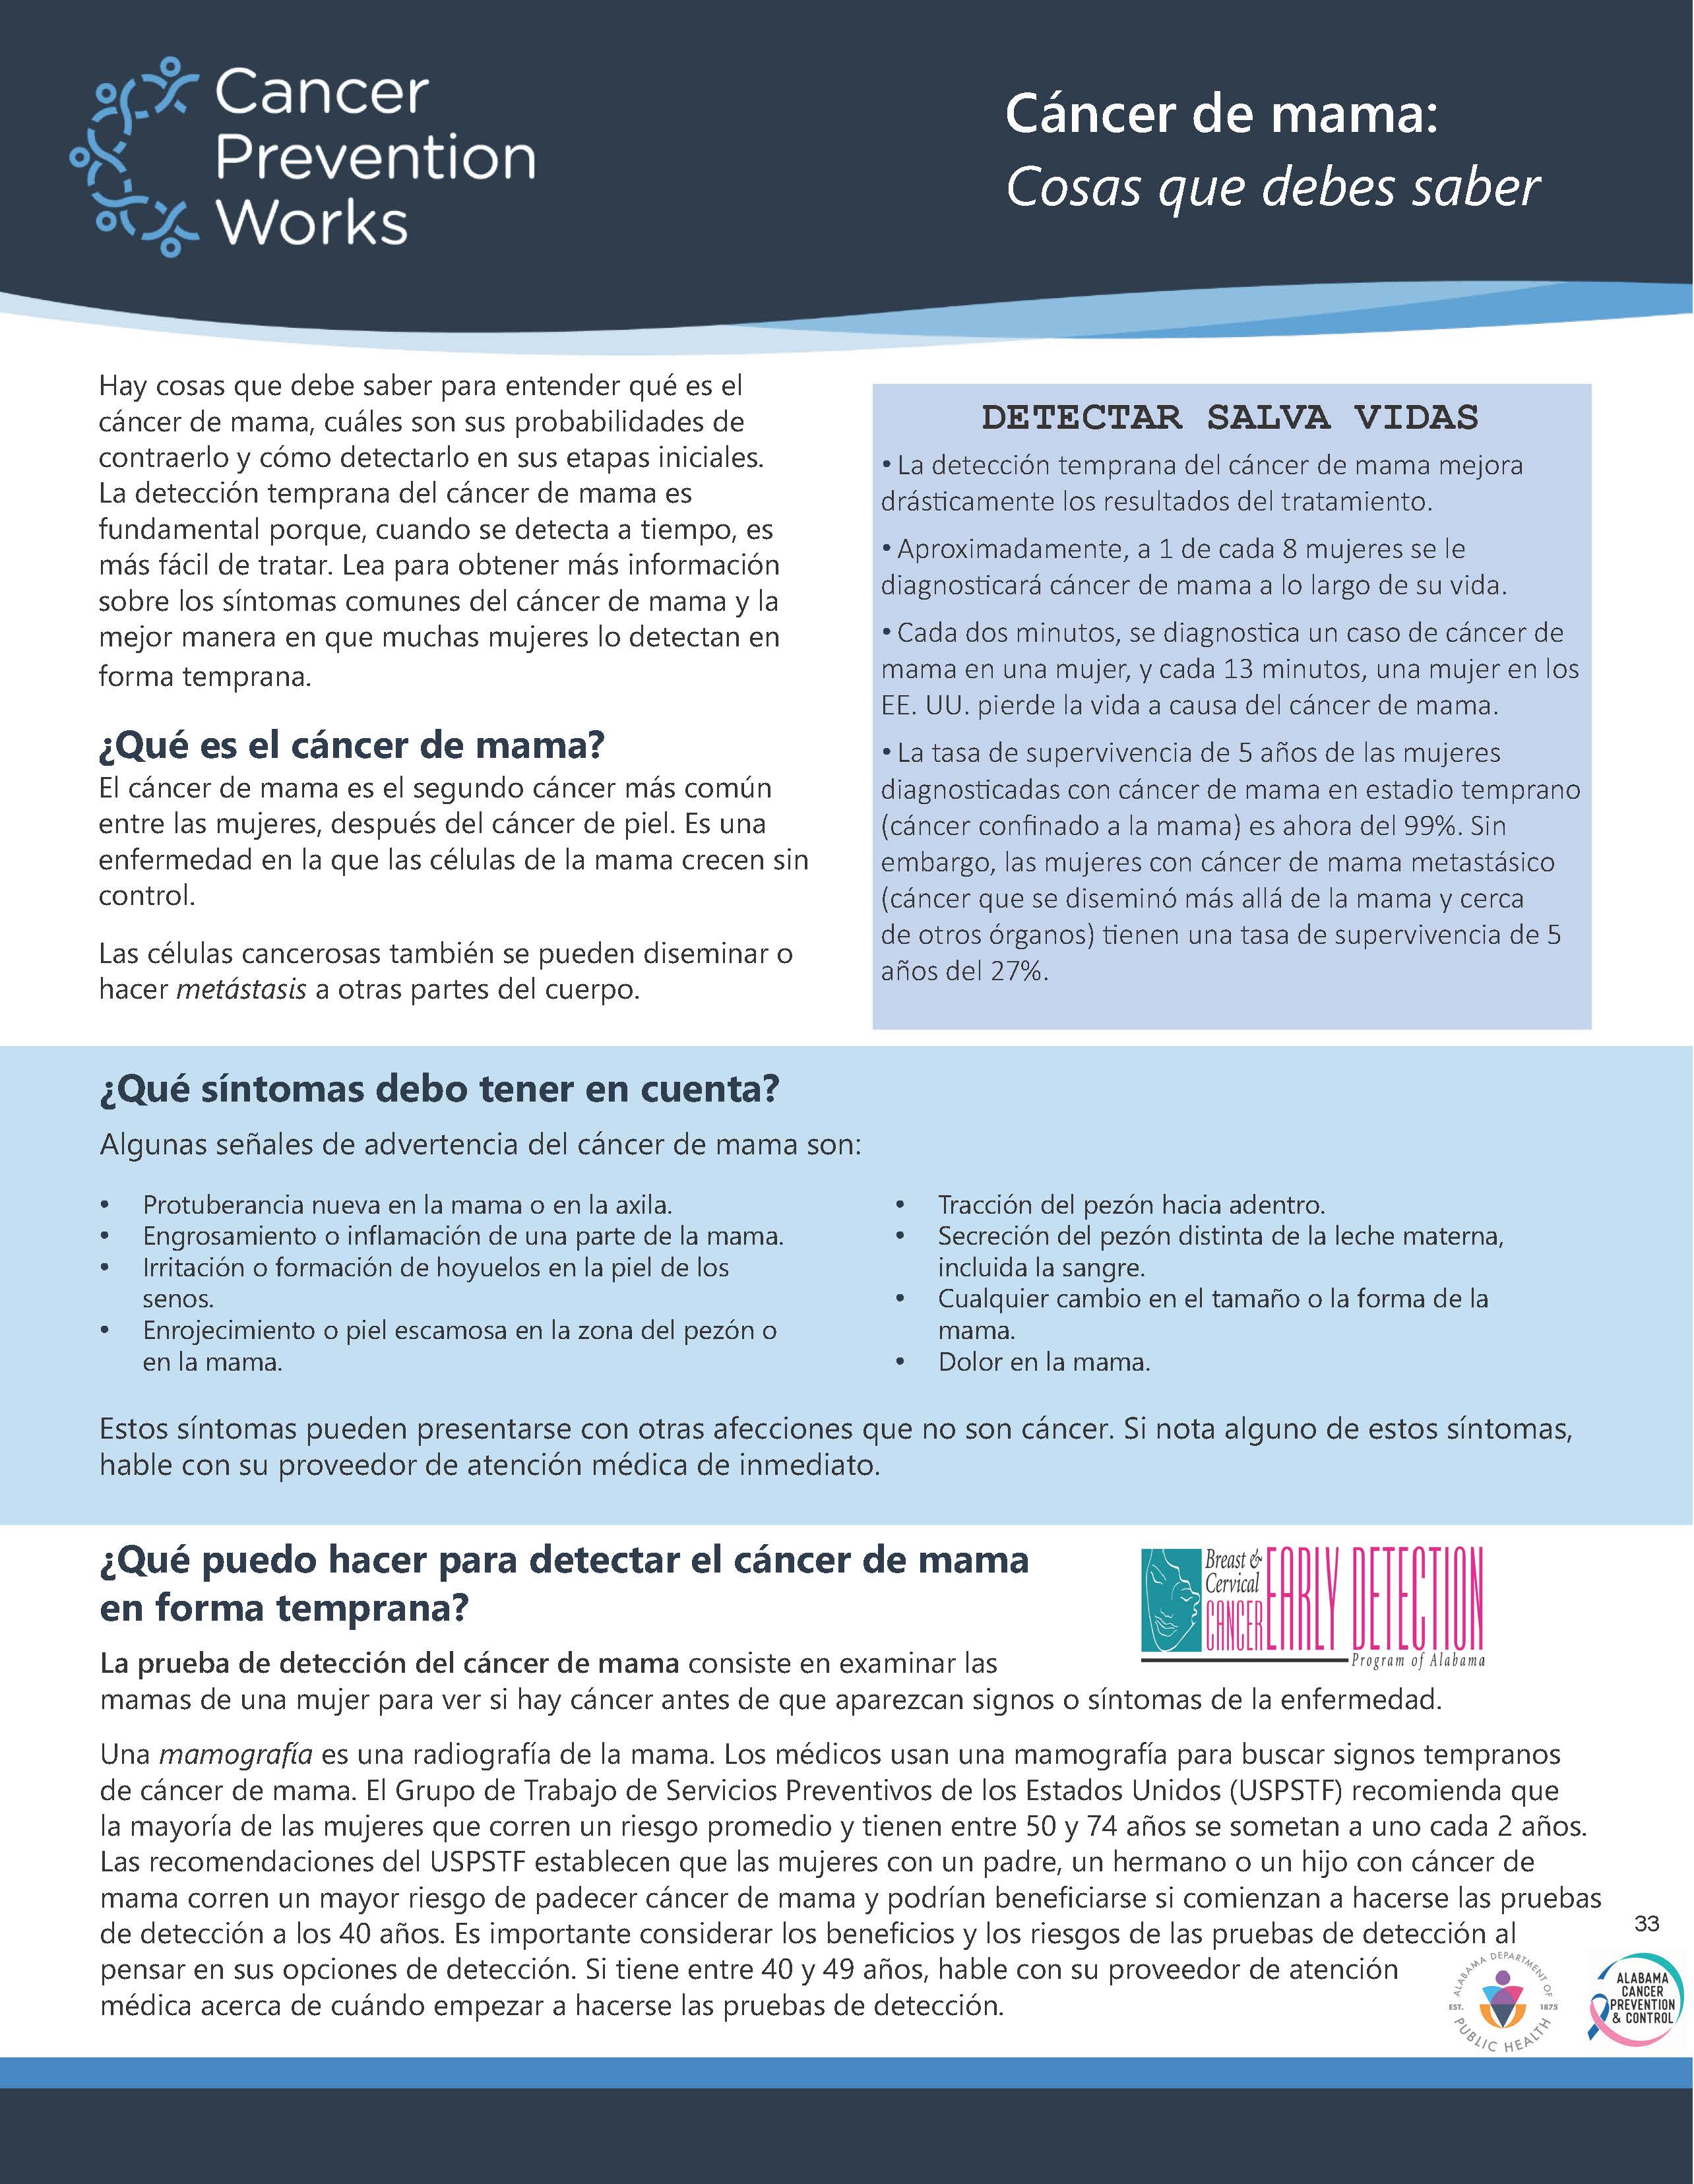 Breast Cancer: Things You Should Know (Spanish)